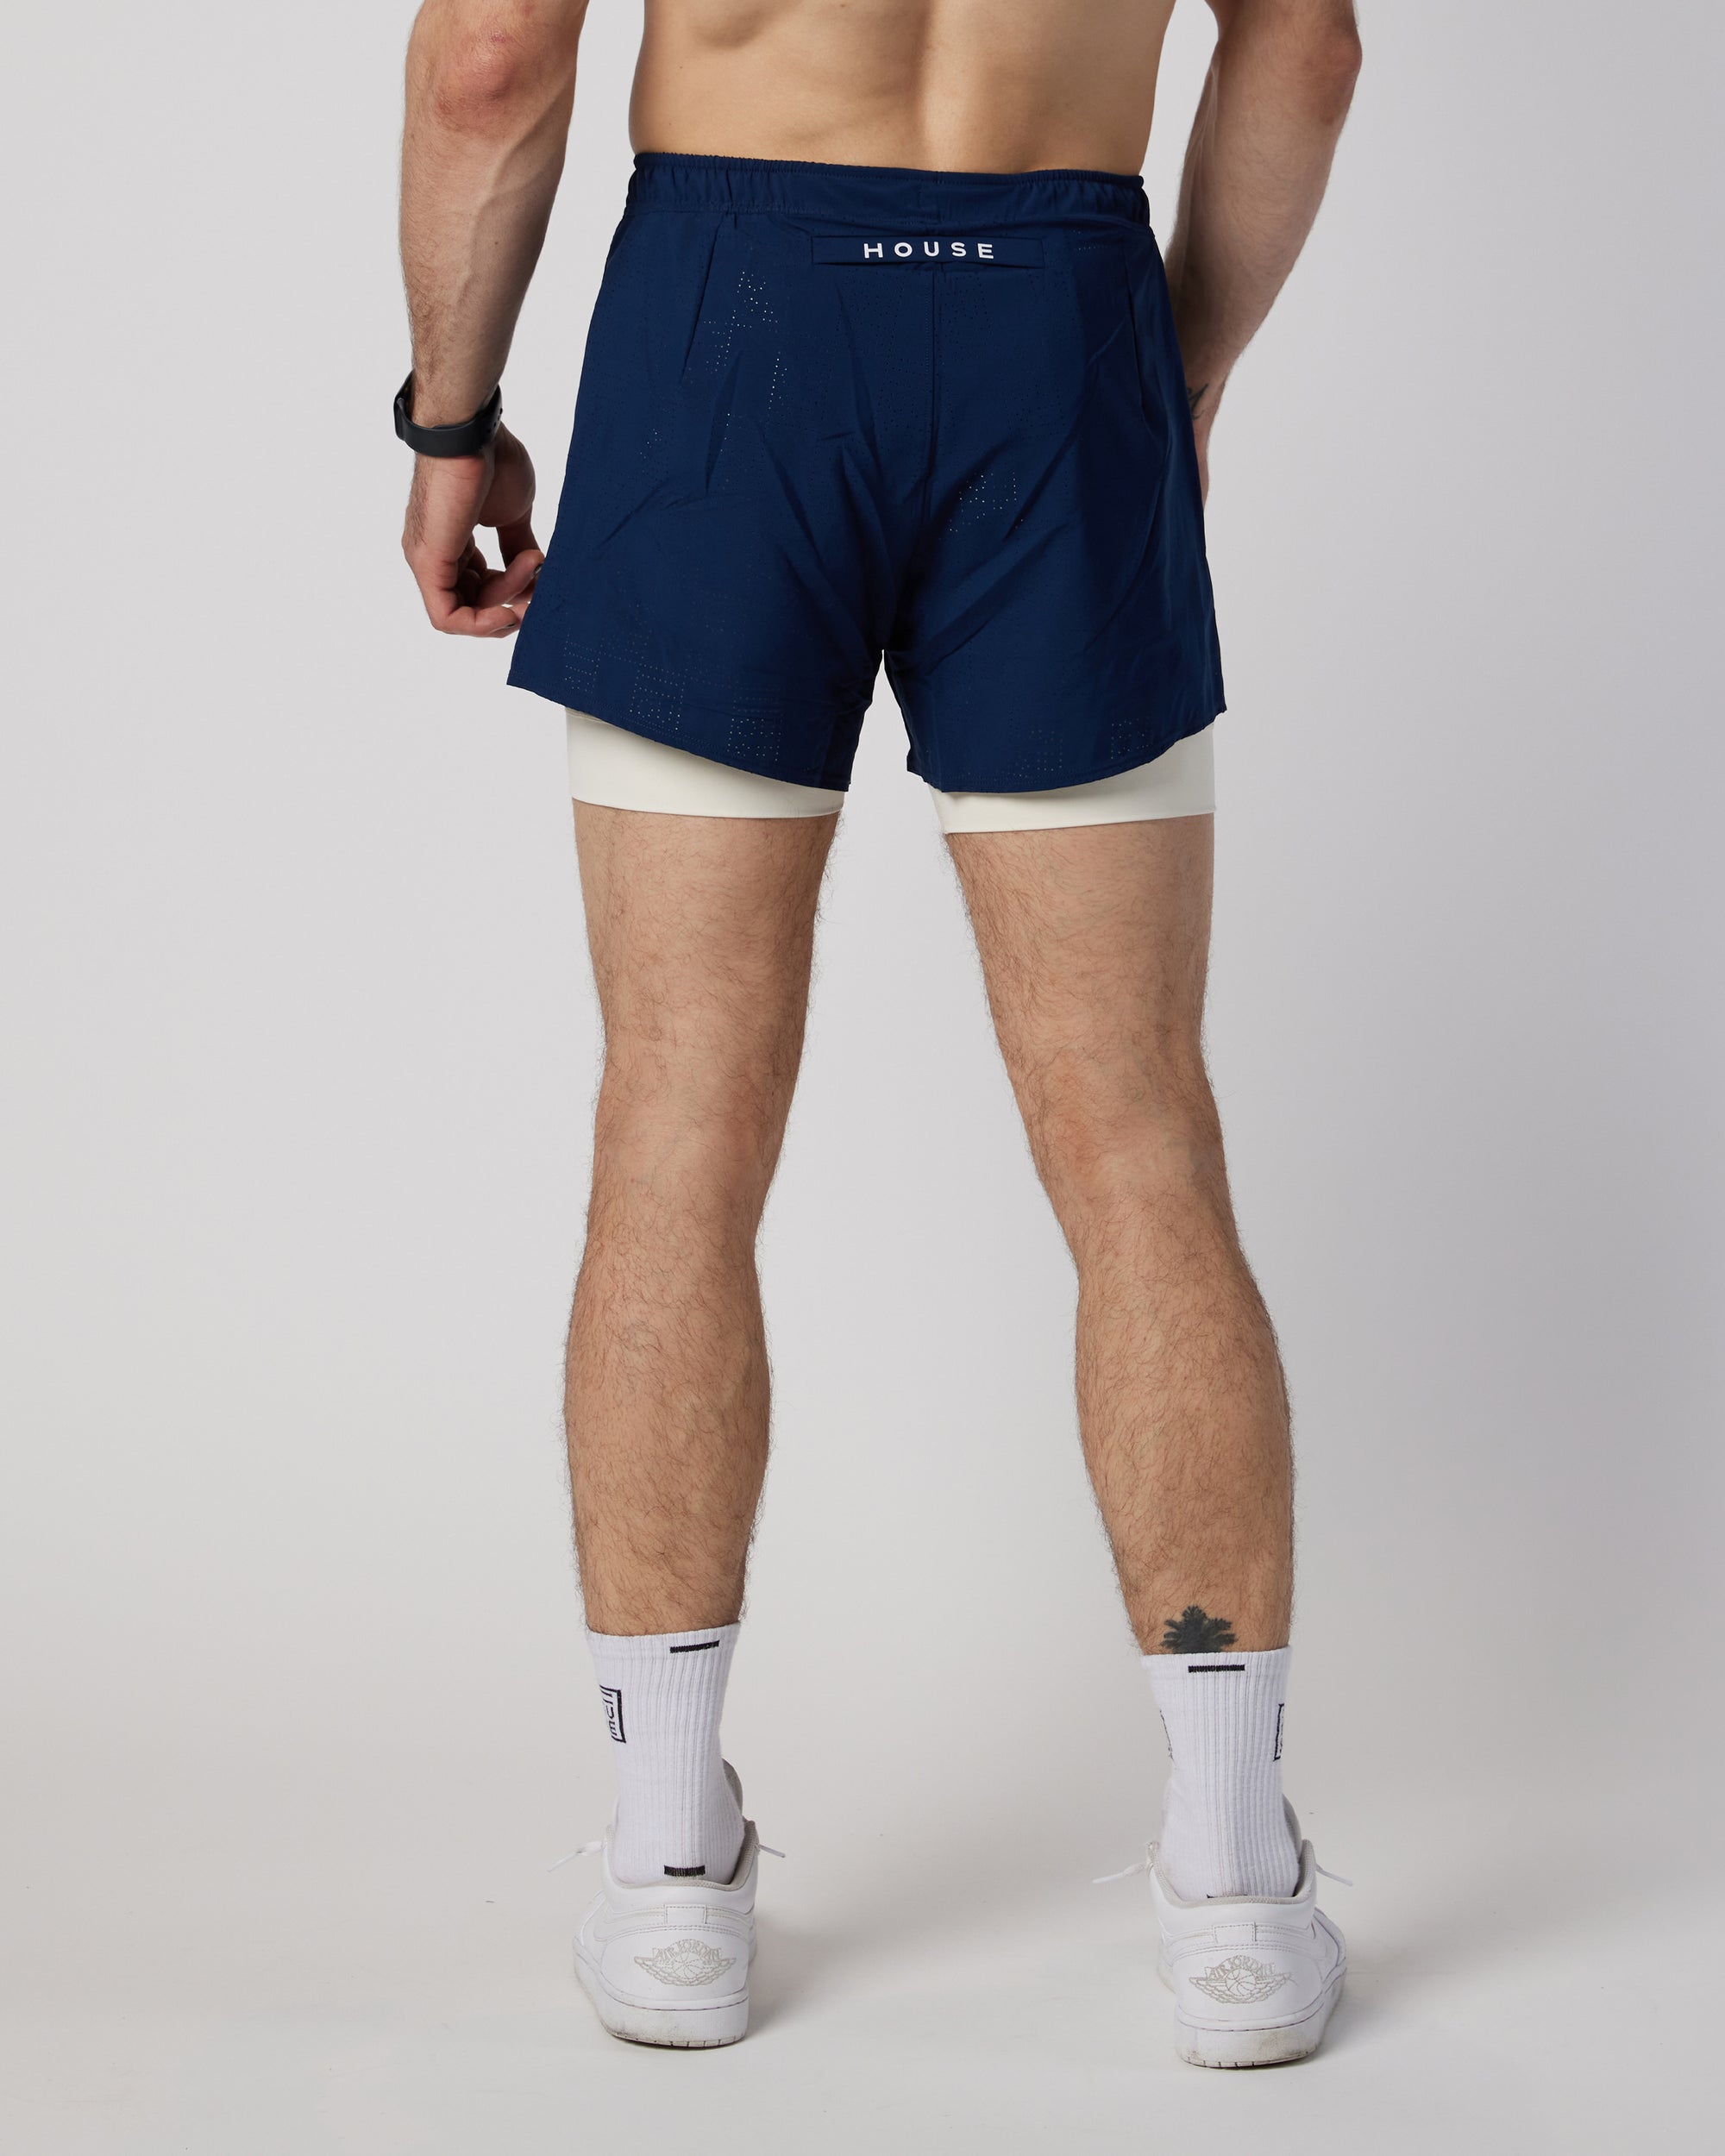 Mens lined sports short in navy and white